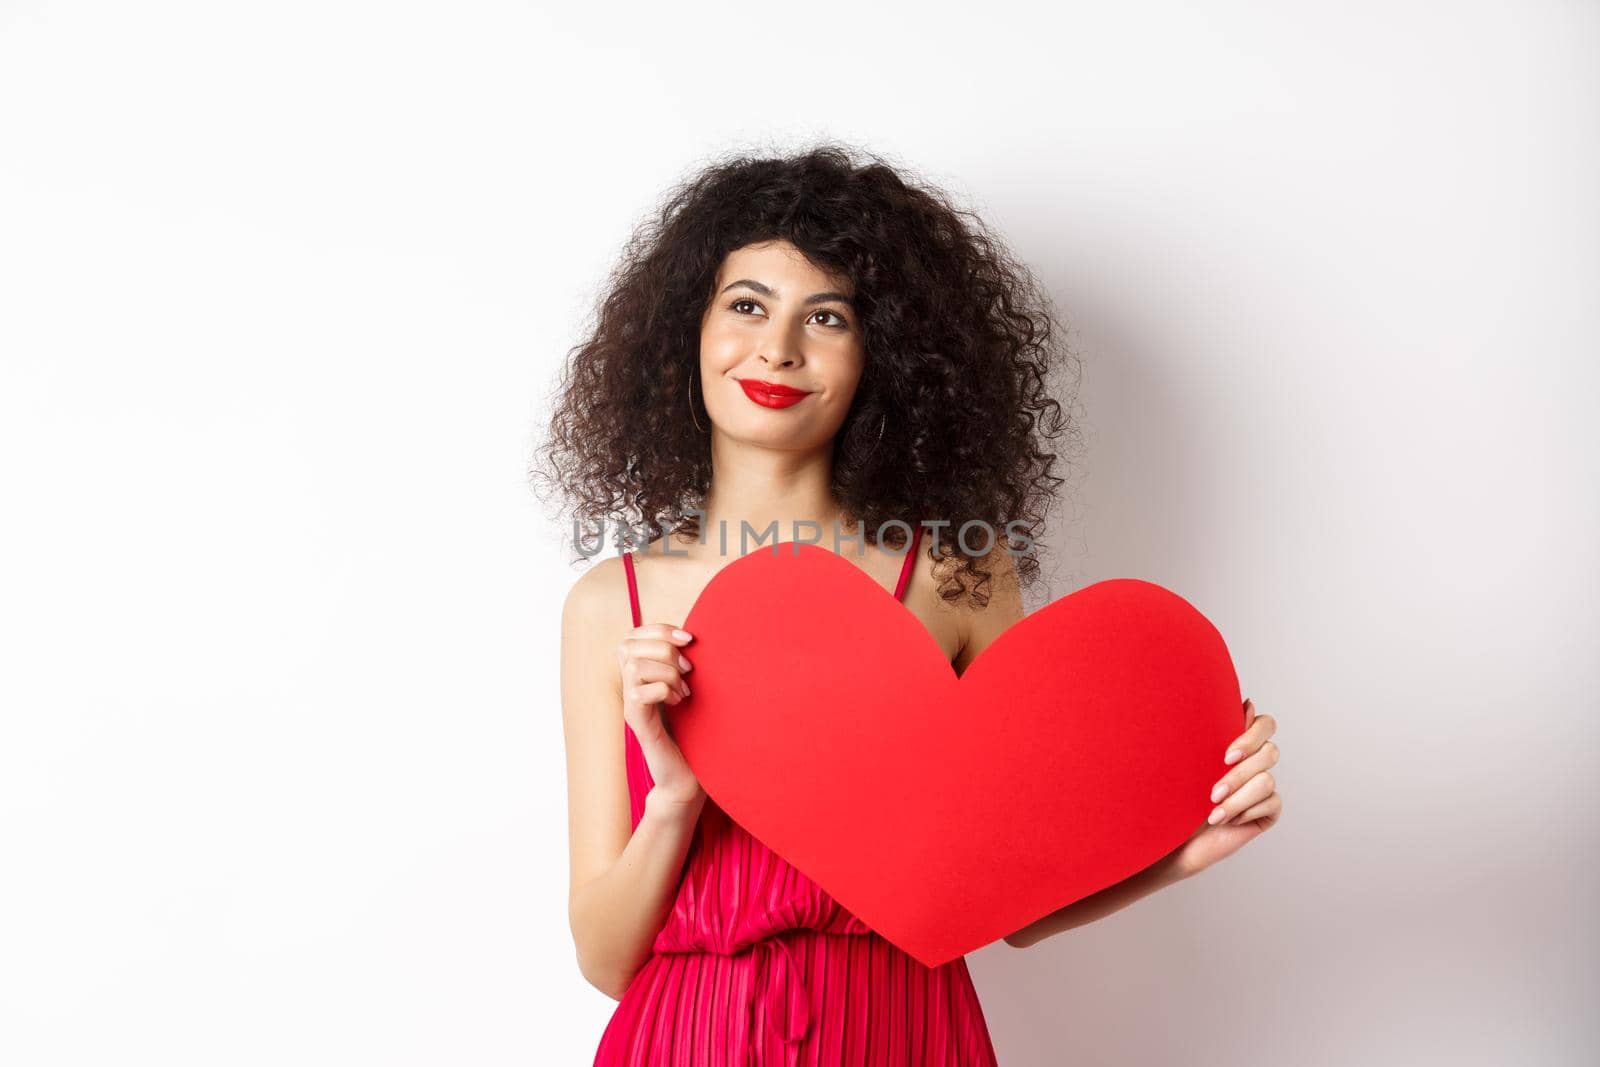 Young romantic woman dreaming about love on Valentines day, looking for soulmate, holding big red heart cutout and gazing pensive left, white background.